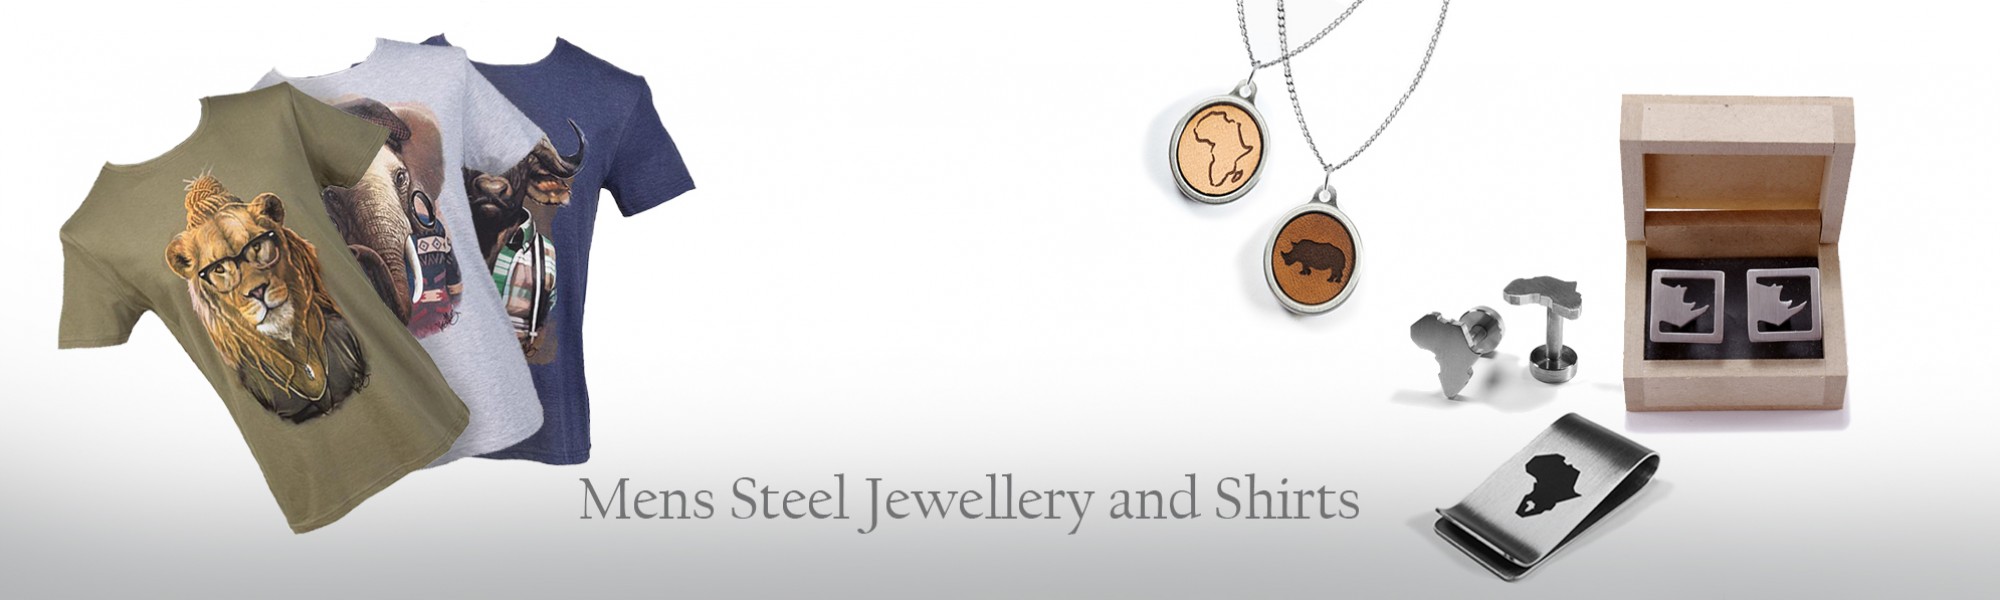 Men's Steel Jewellery and Shirts